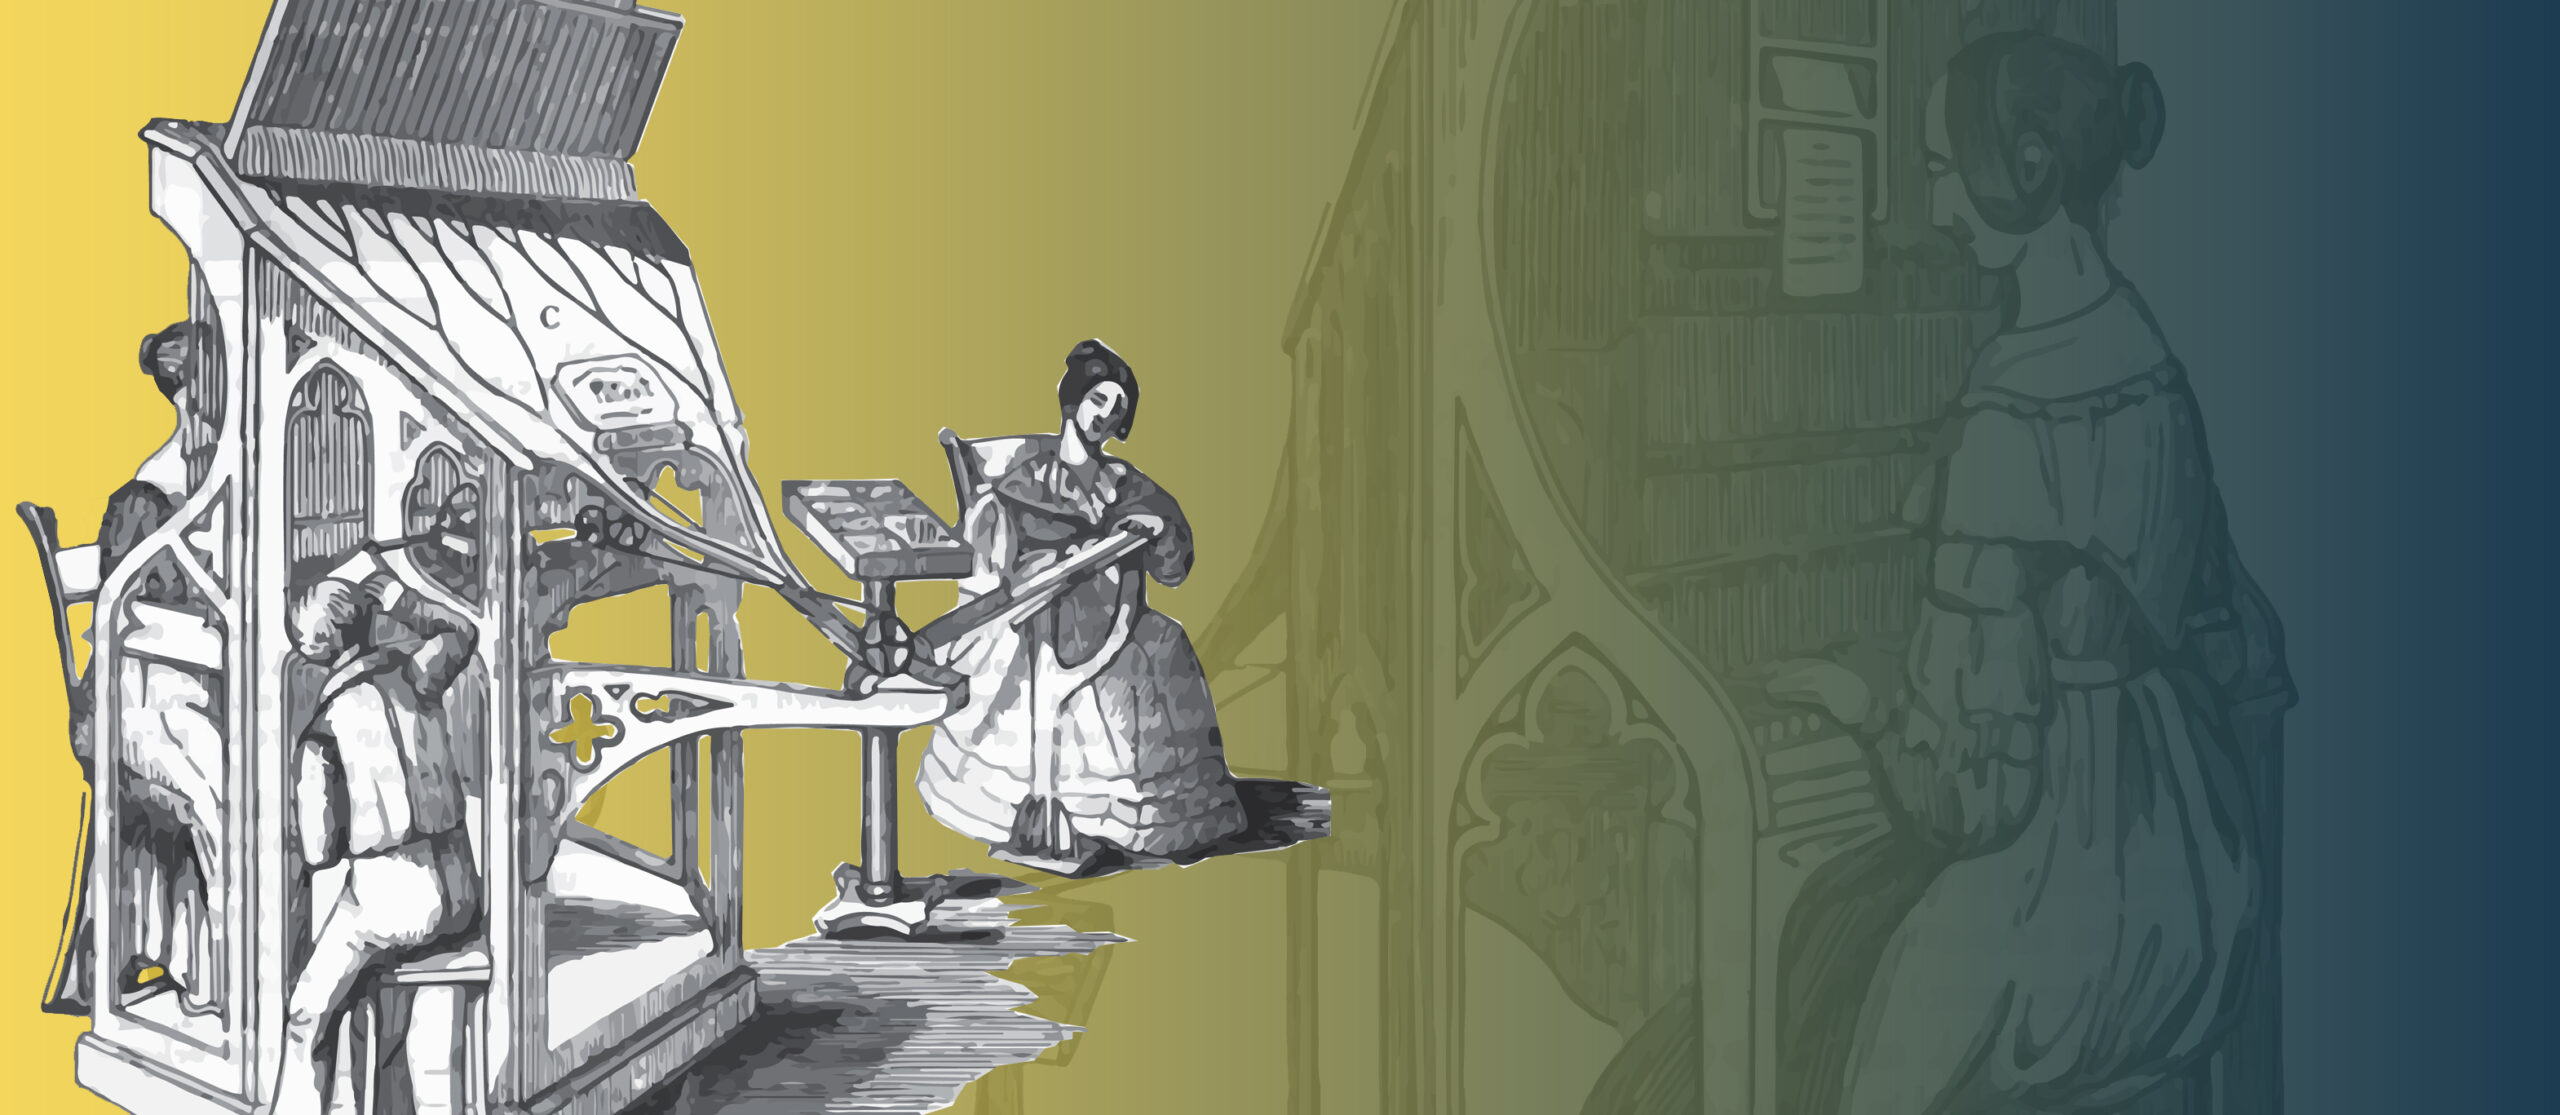 Stylised illustration of two women and a boy working at a large machine: the pianotype